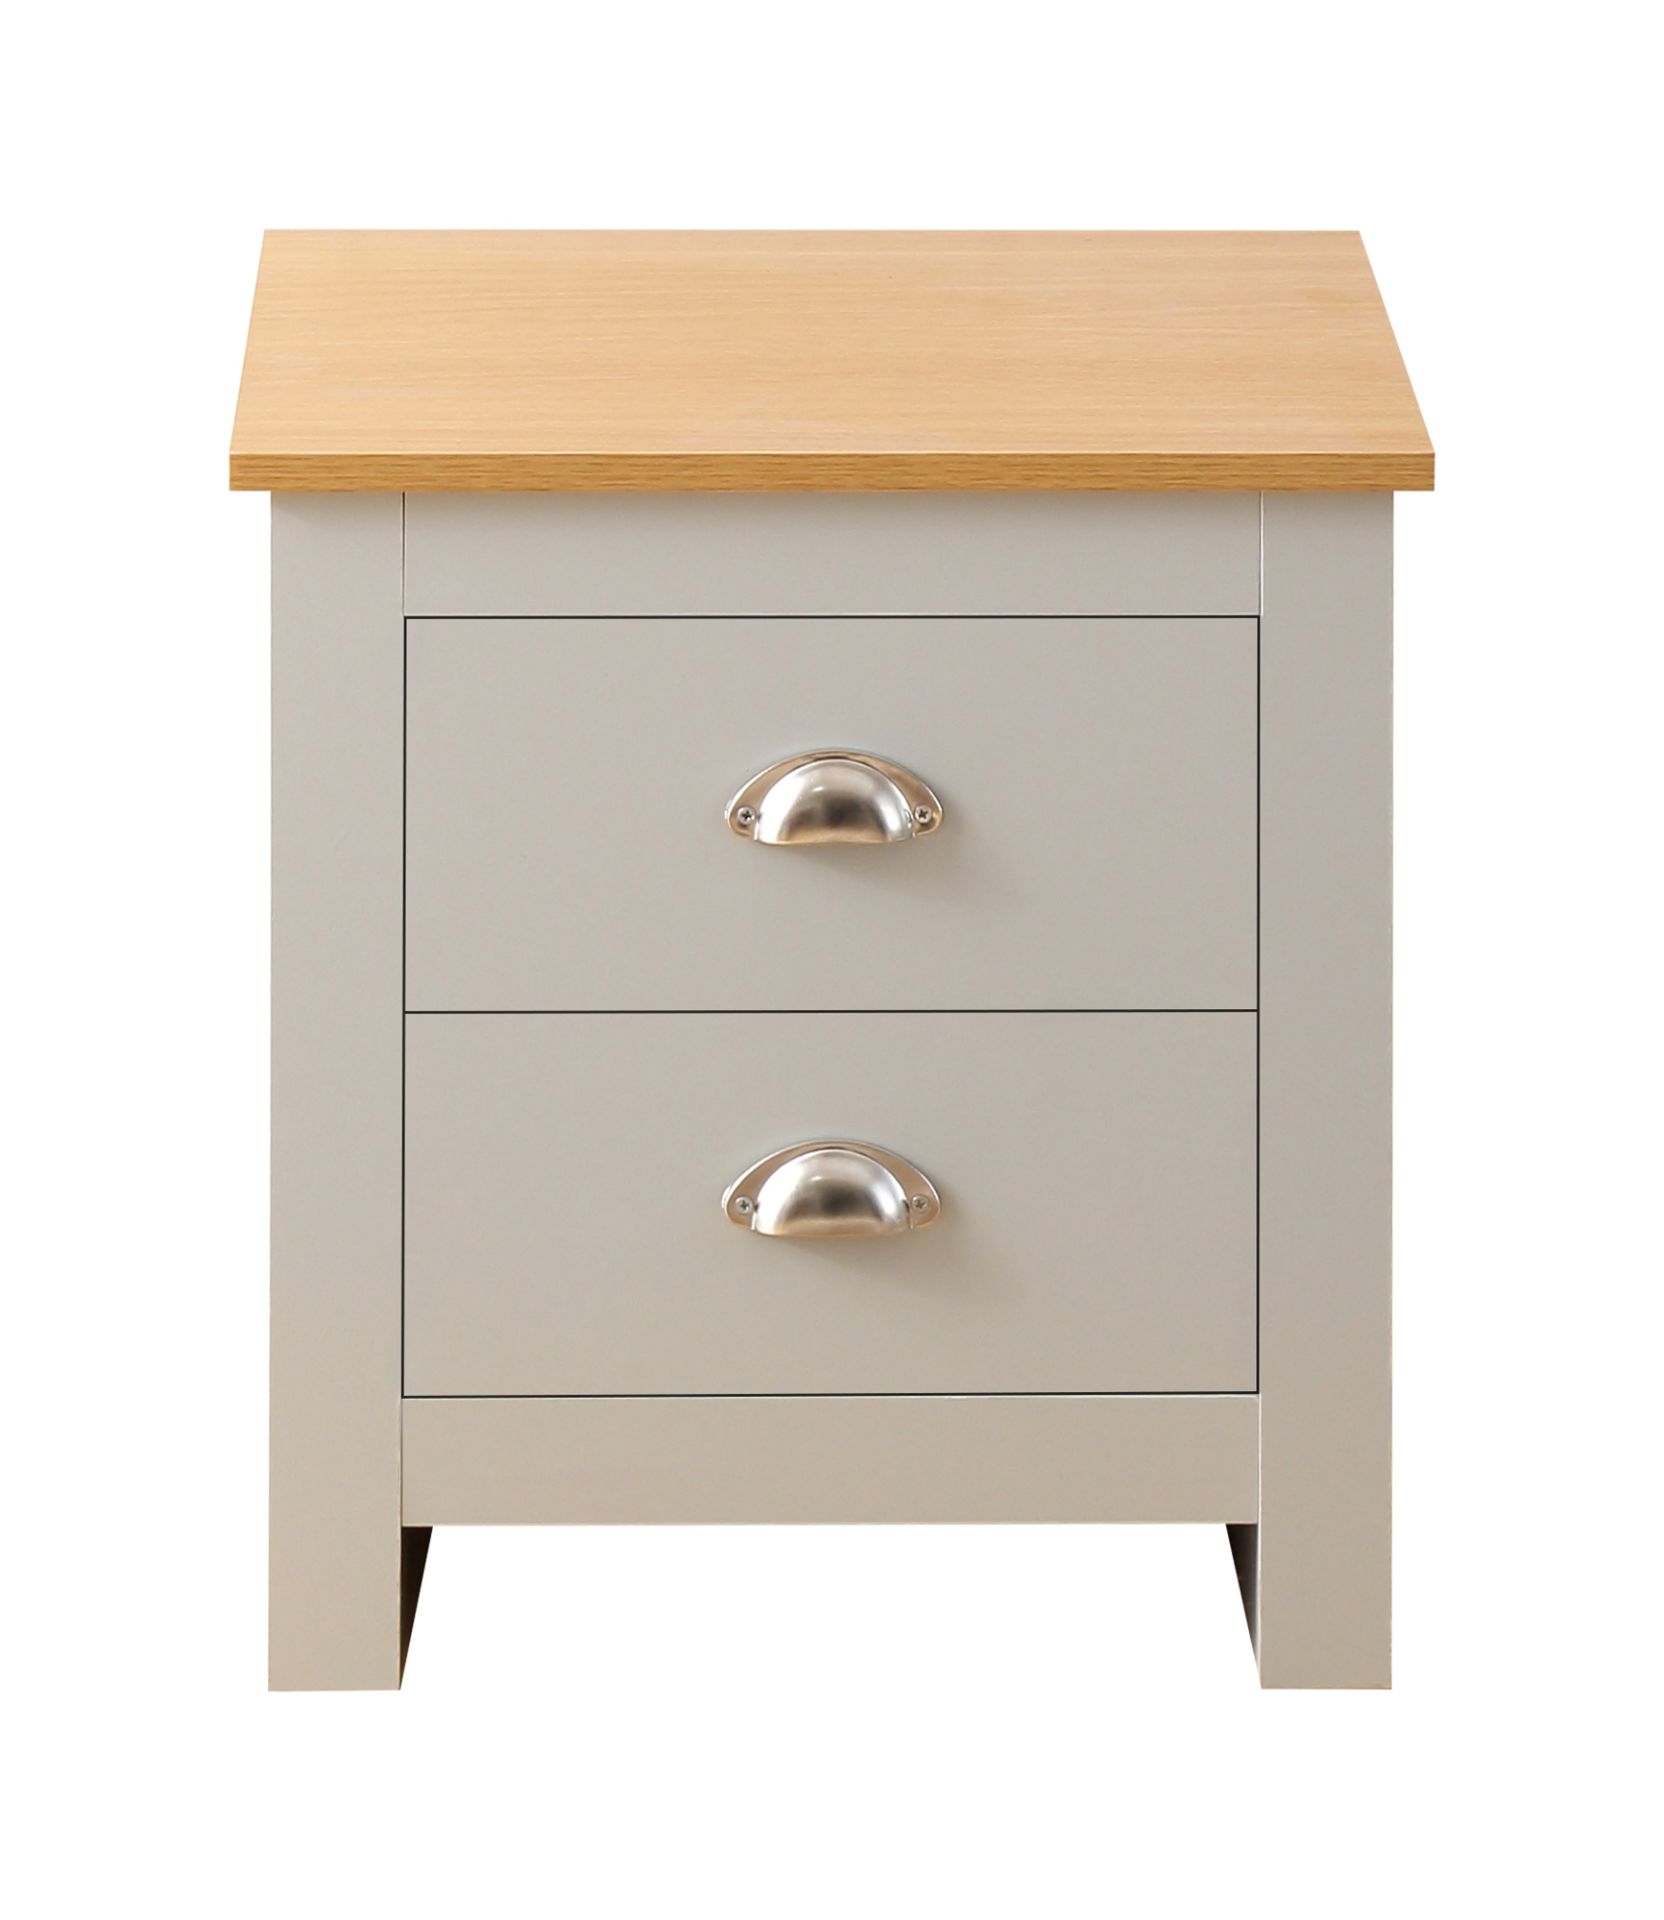 20 X BRAND NEW FLAT PACKED GREY WITH OAK TOP SHAKER-INSPIRED STYLISH DESIGN BEDSIDES - Image 2 of 4